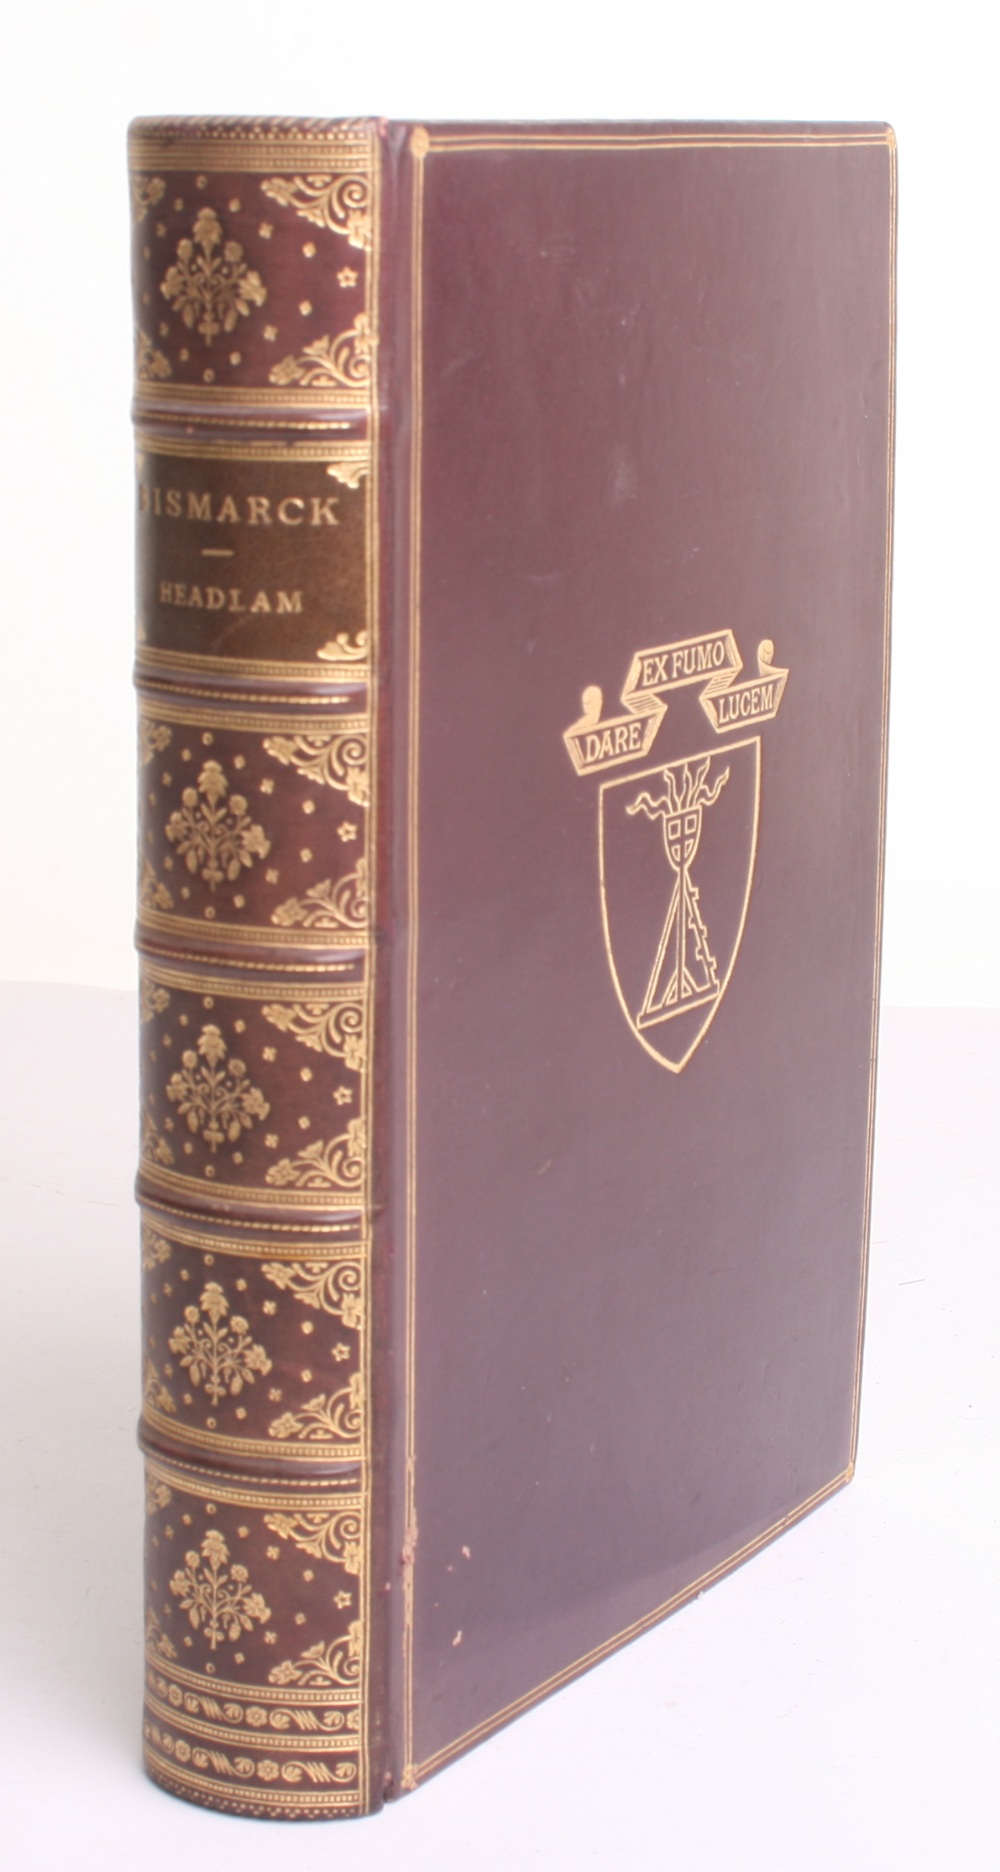 Book Presented to Famous WW1 War Poet Siegfried Sassoon, the book is a copy of, Bismarck and the